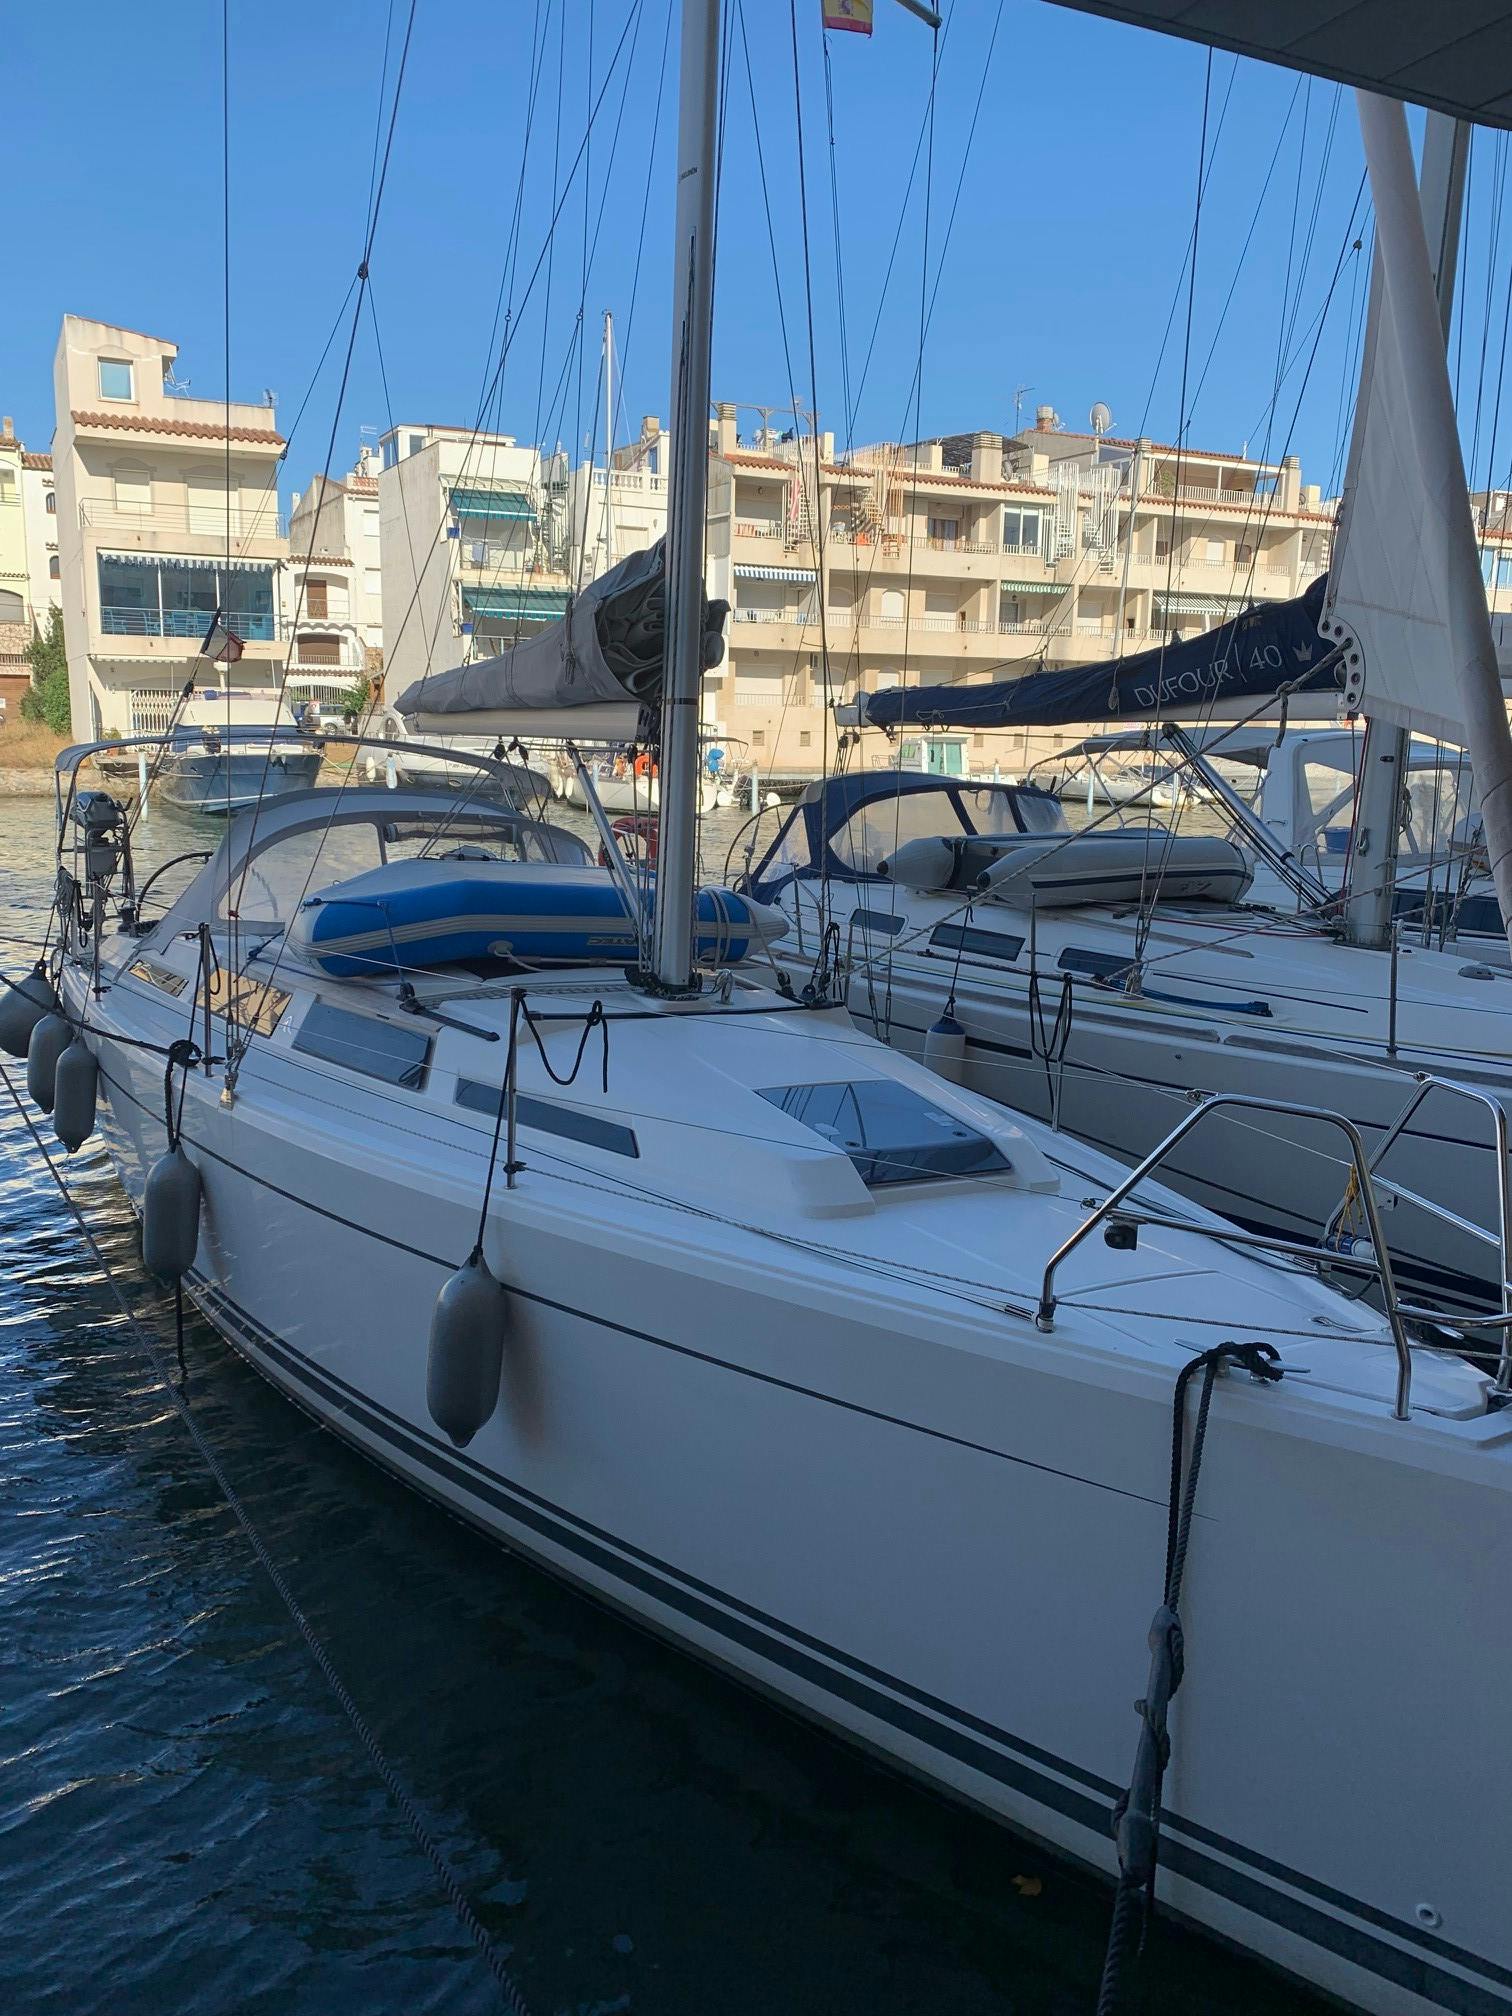 Book Hanse 345 Sailing yacht for bareboat charter in Roses, Empuriabrava marina, Catalonia, Spain with TripYacht!, picture 3